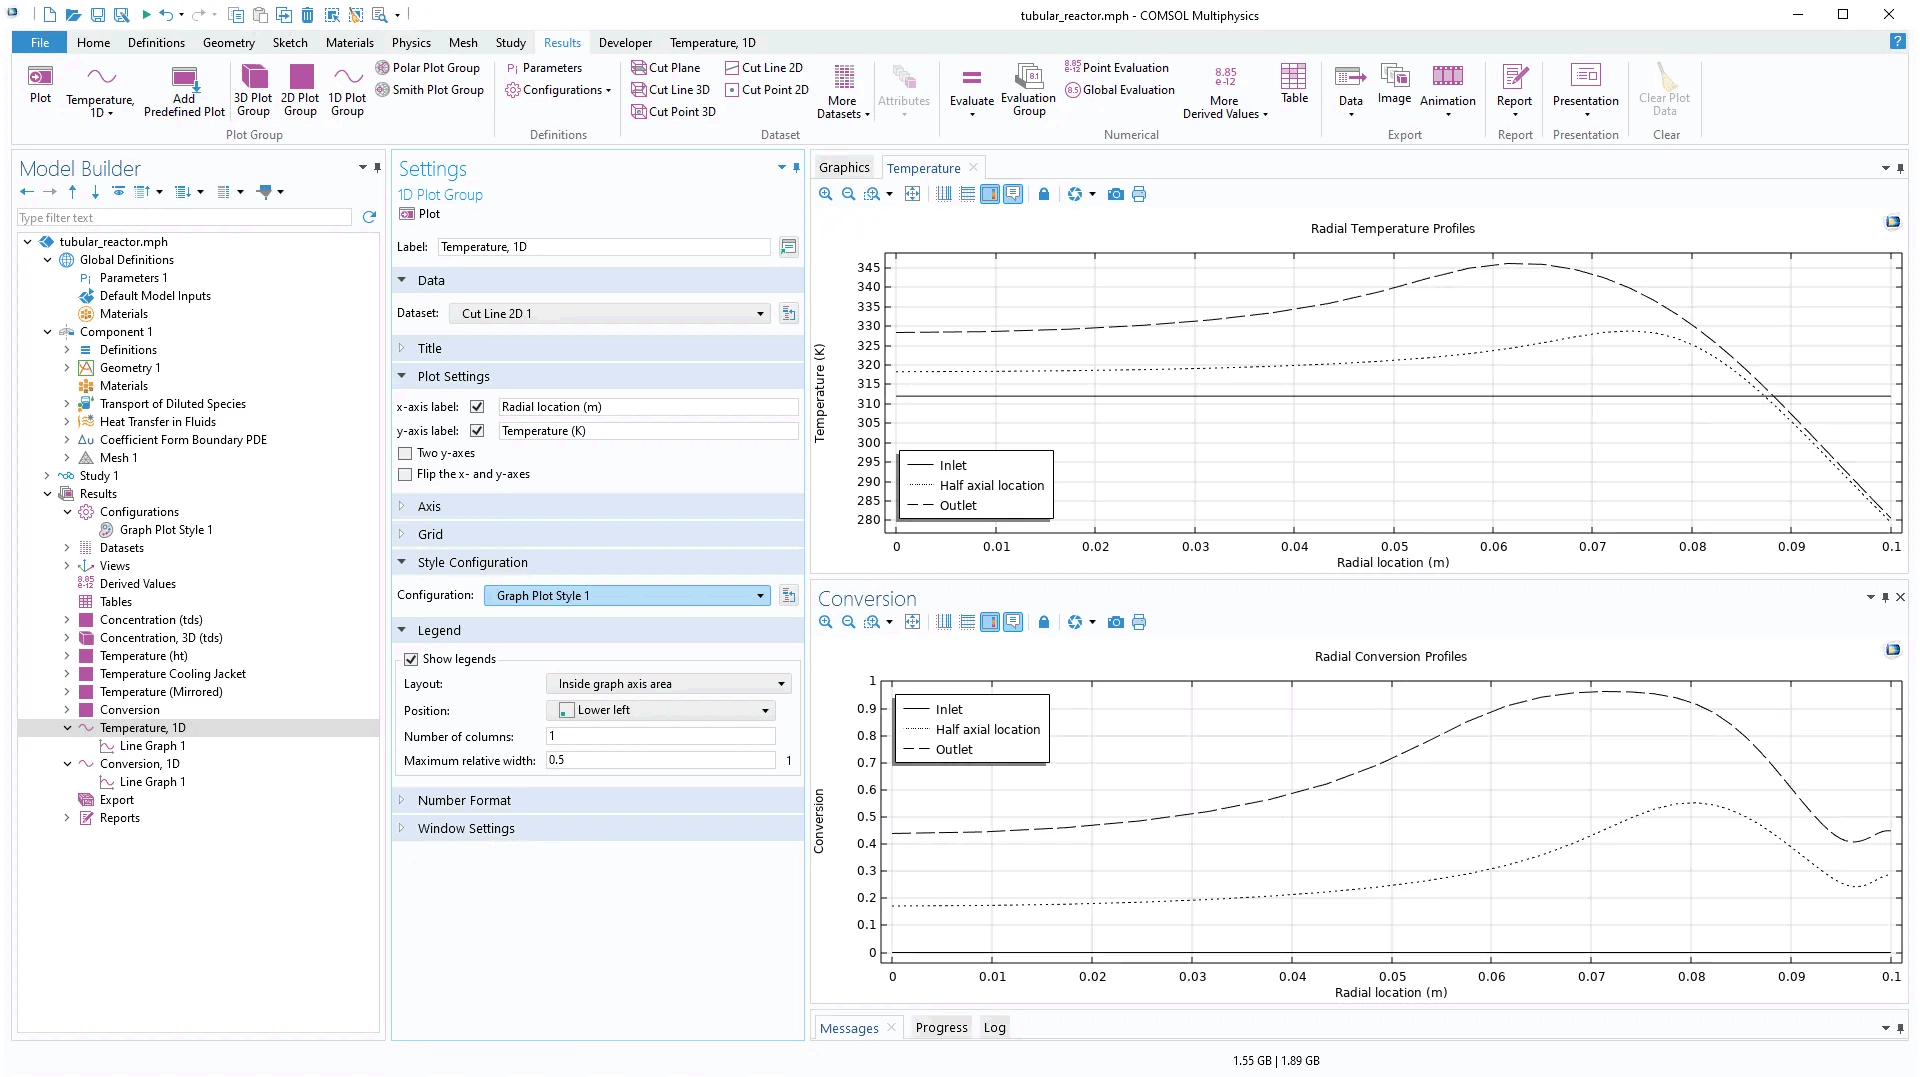 The COMSOL Multiphysics UI showing the Model Builder with a Graph Plot Style Configuration highlighted and selected within a 1D plot Settings window.